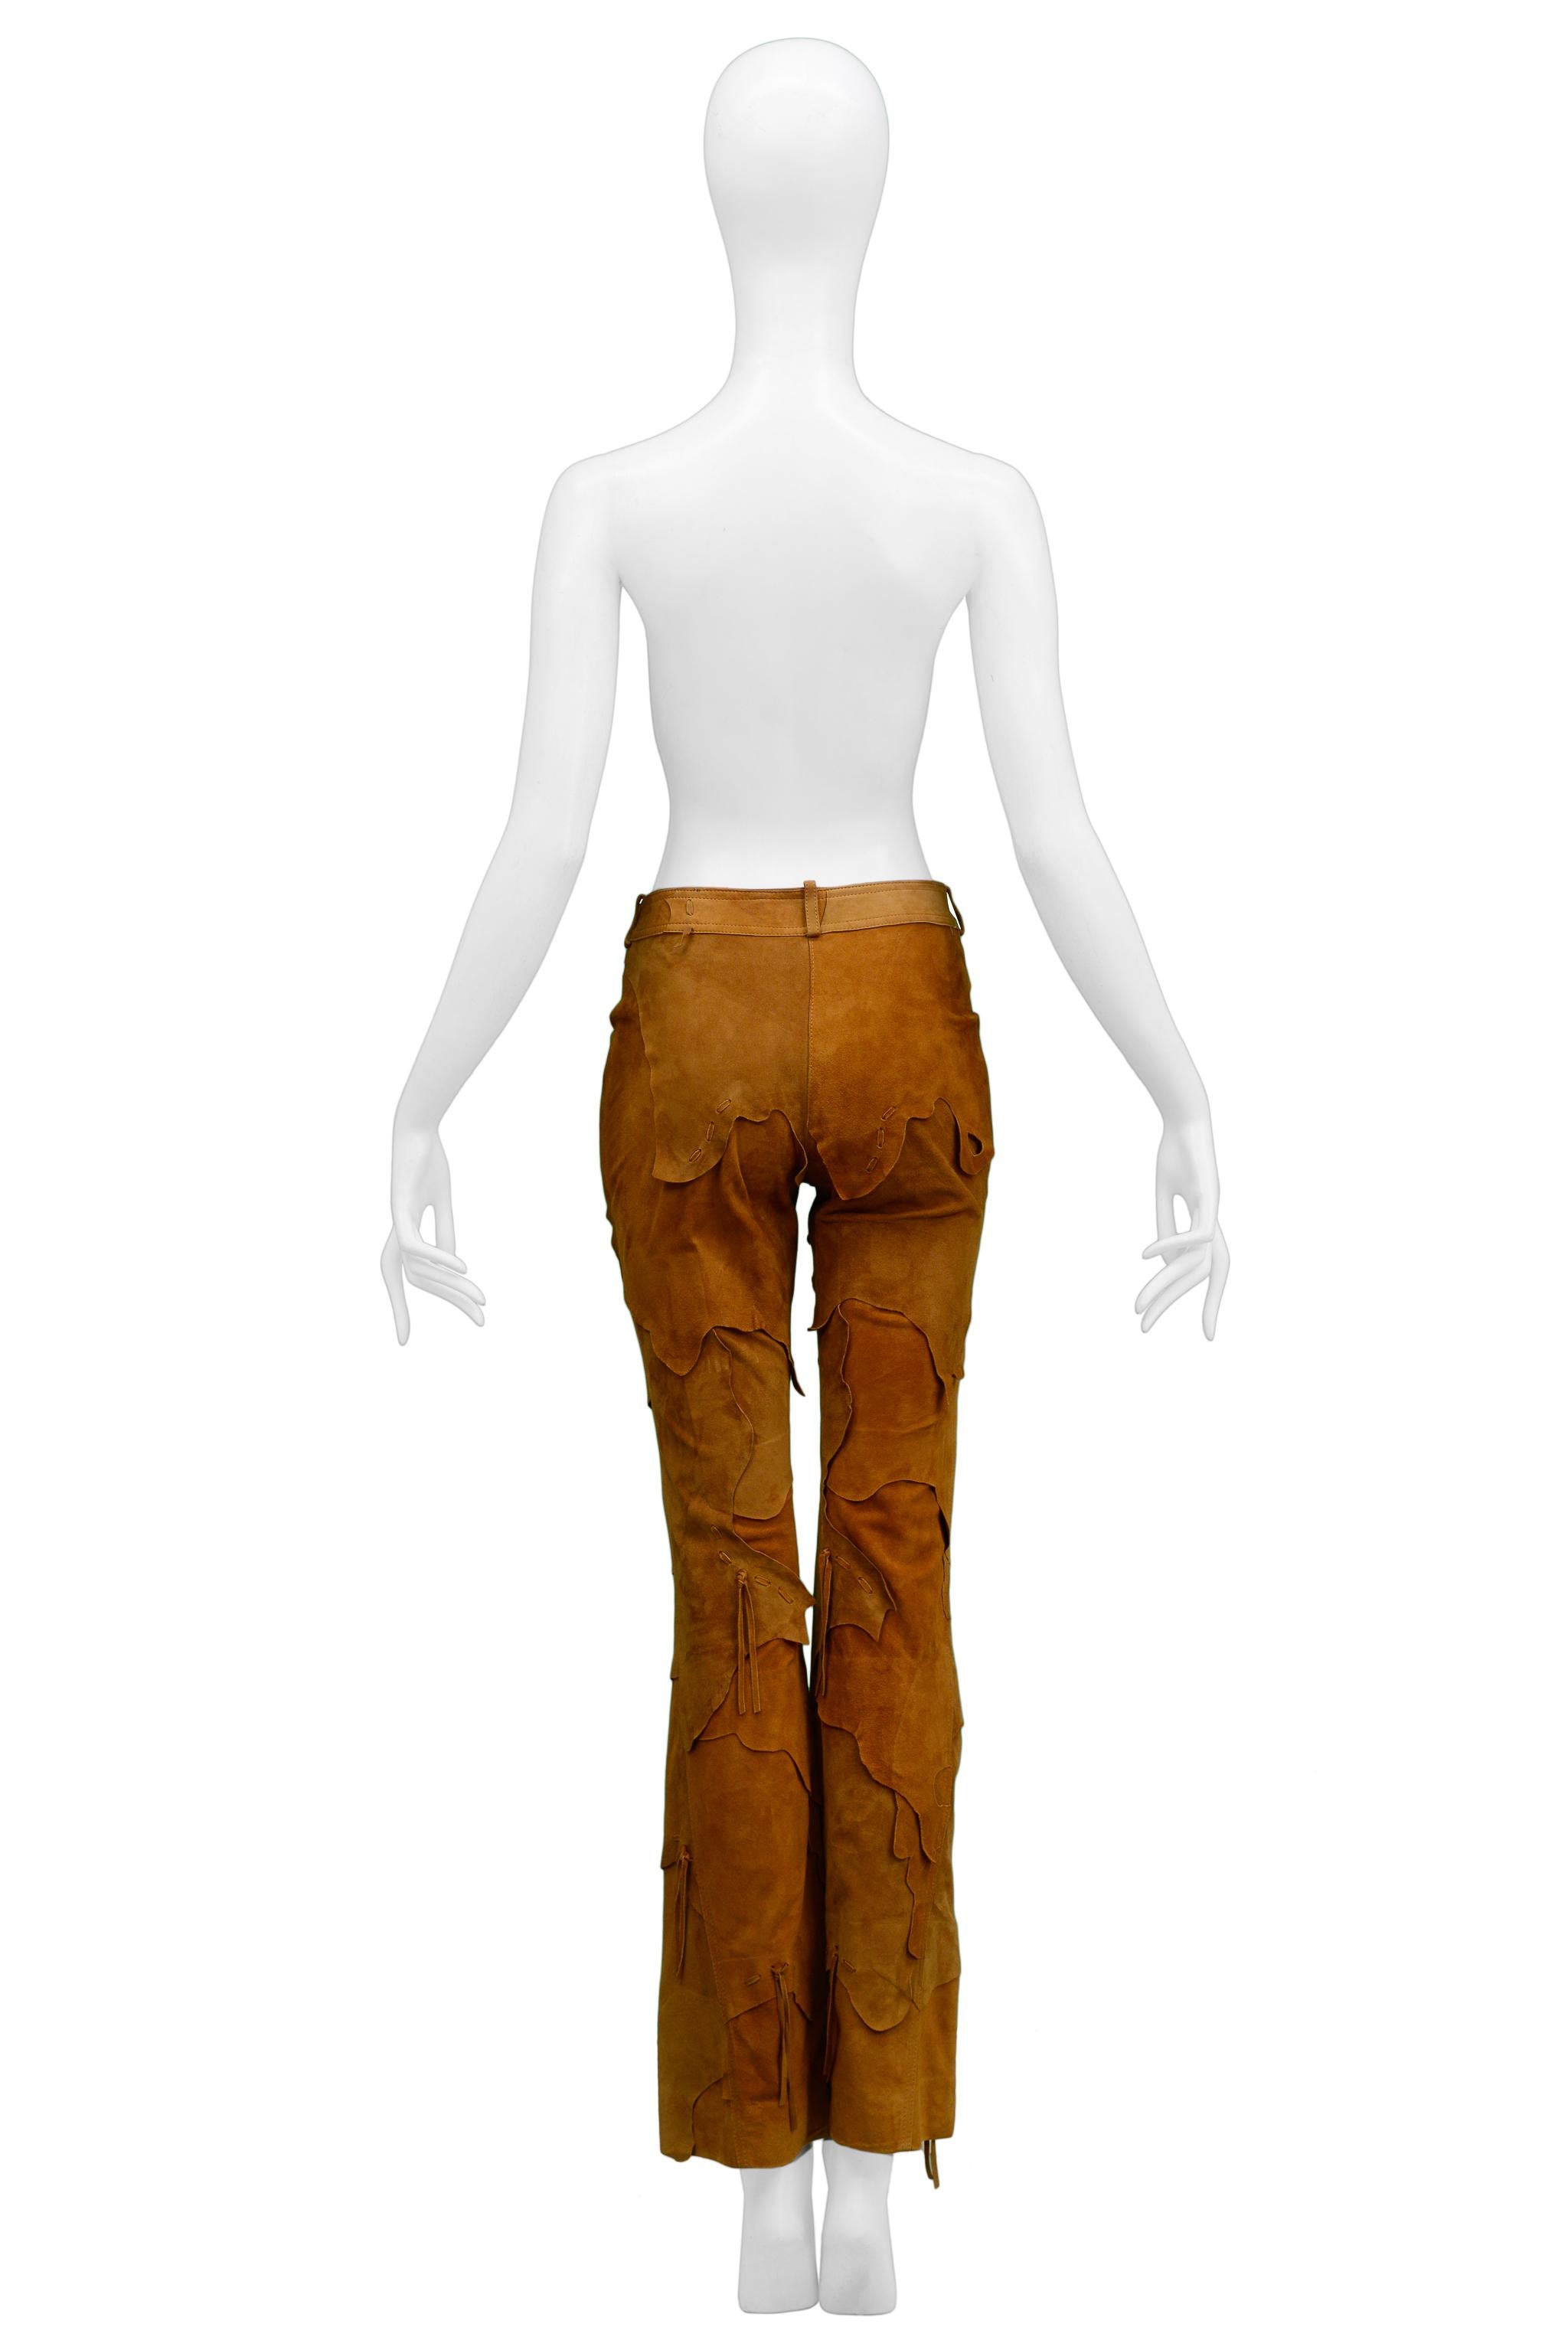 Women's Vintage Christian Dior By Galliano Brown Suede Patchwork Leather Pants 2001